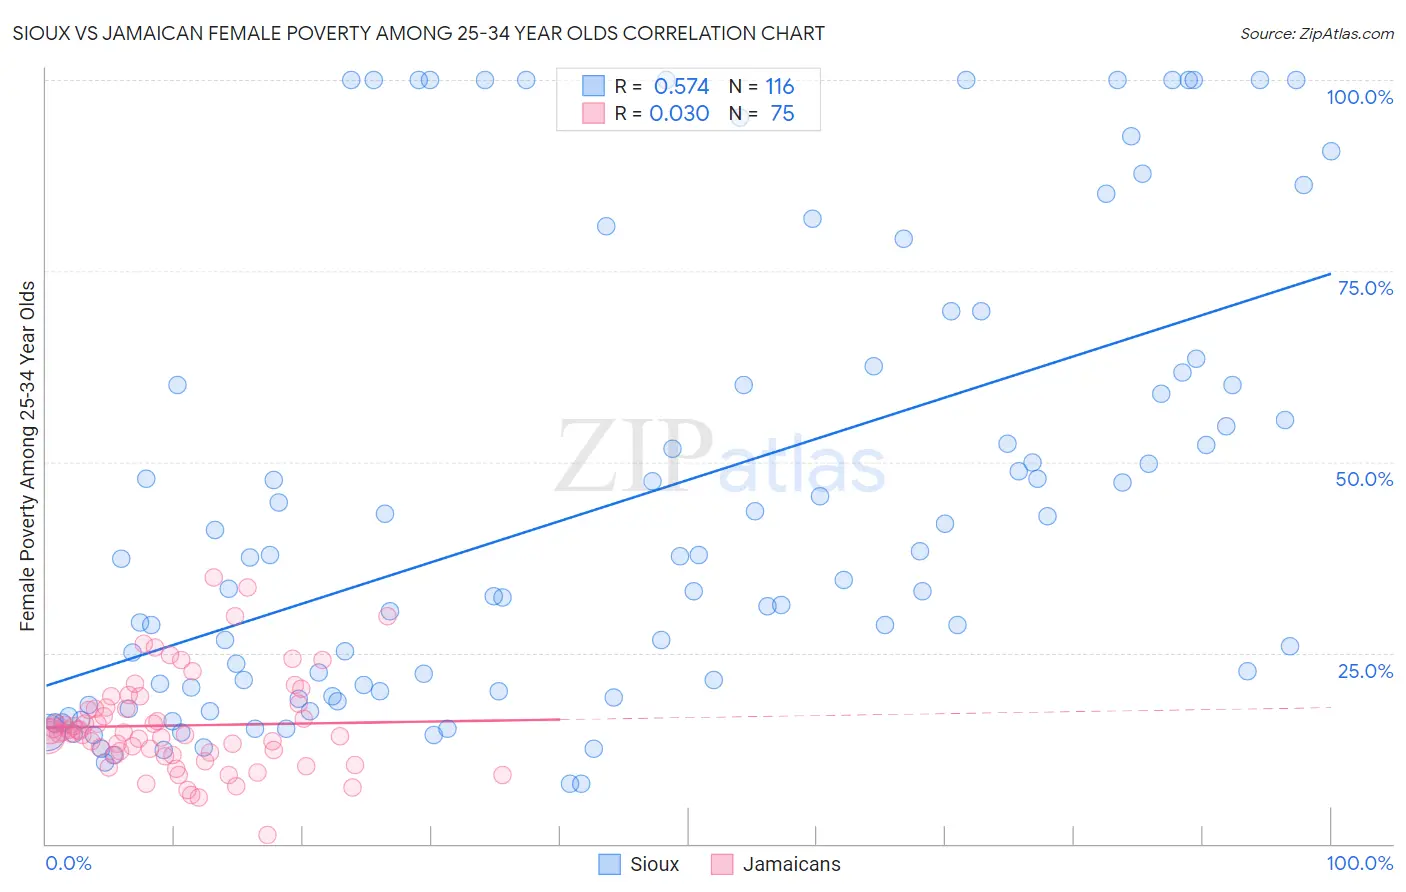 Sioux vs Jamaican Female Poverty Among 25-34 Year Olds